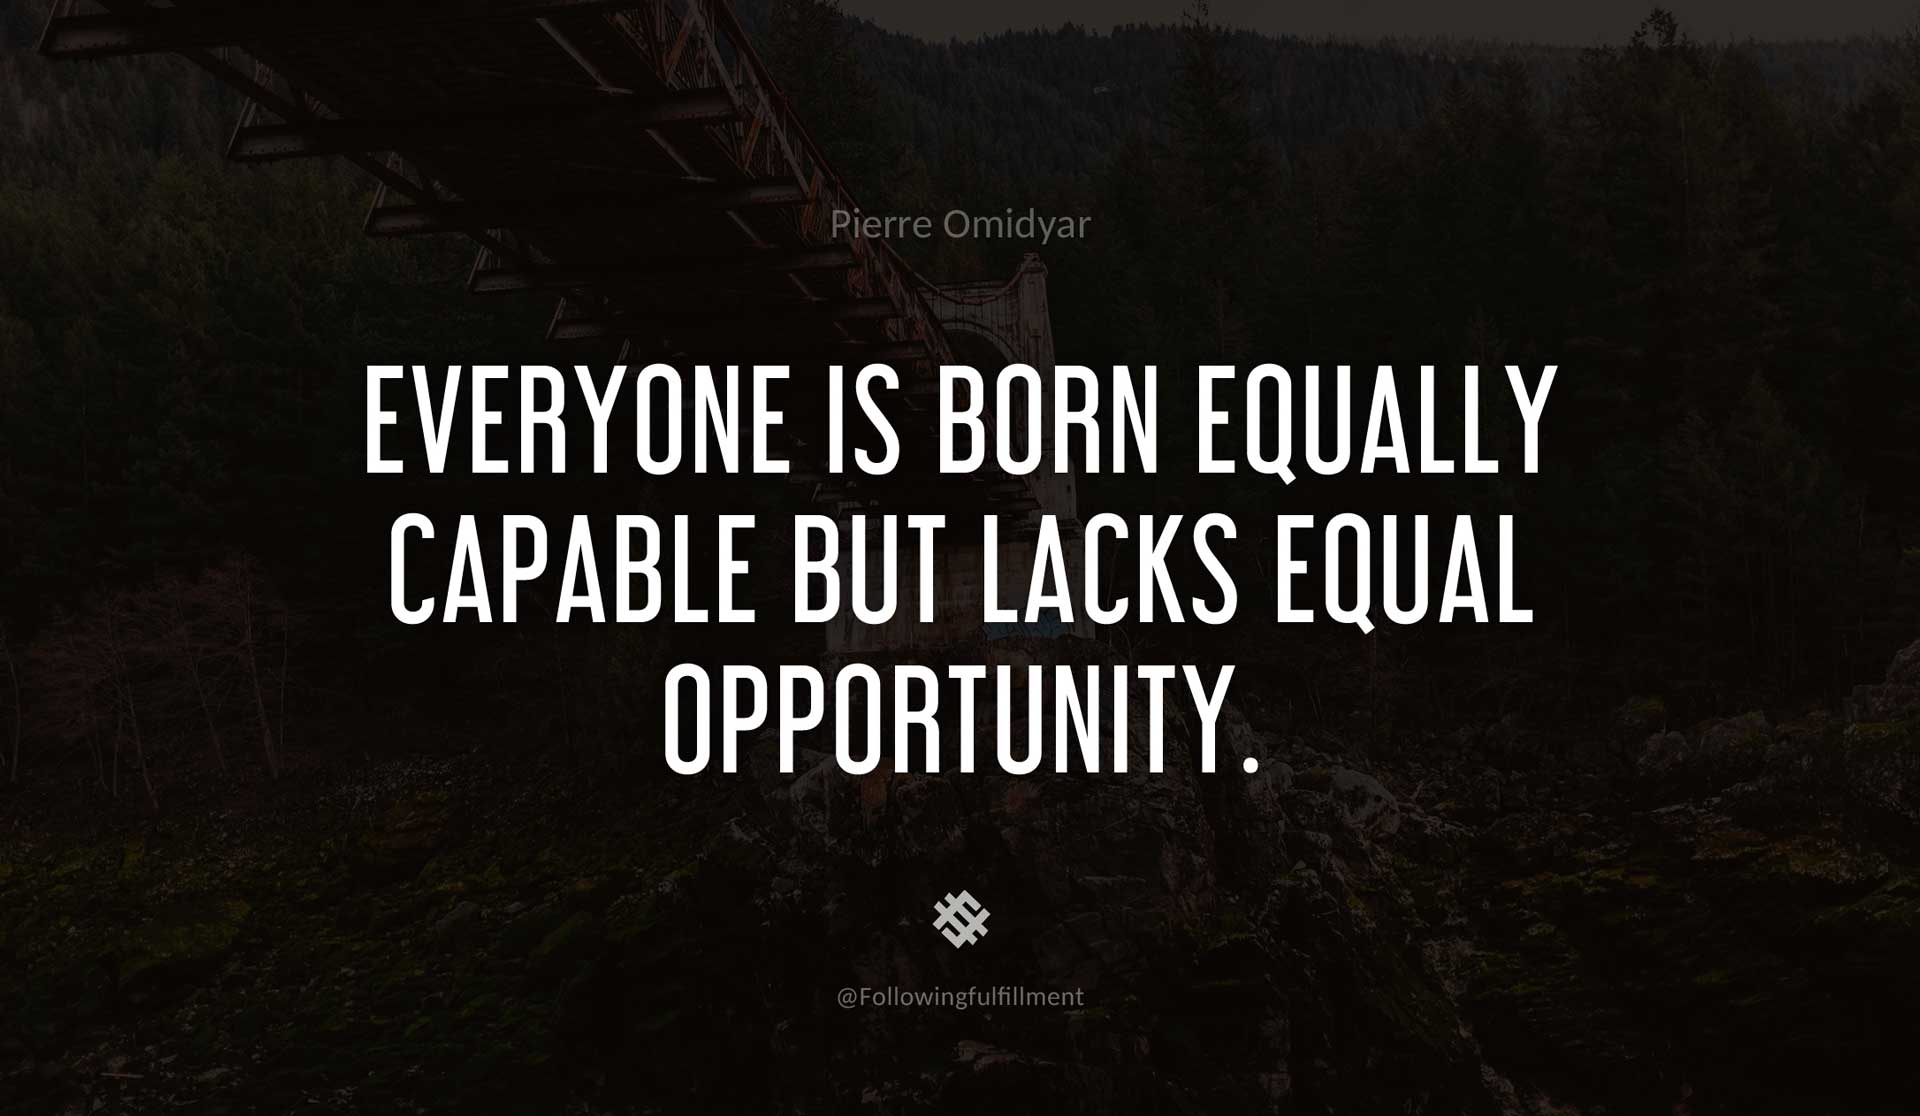 Everyone-is-born-equally-capable-but-lacks-equal-opportunity.-PIERRE-OMIDYAR-Quote.jpg